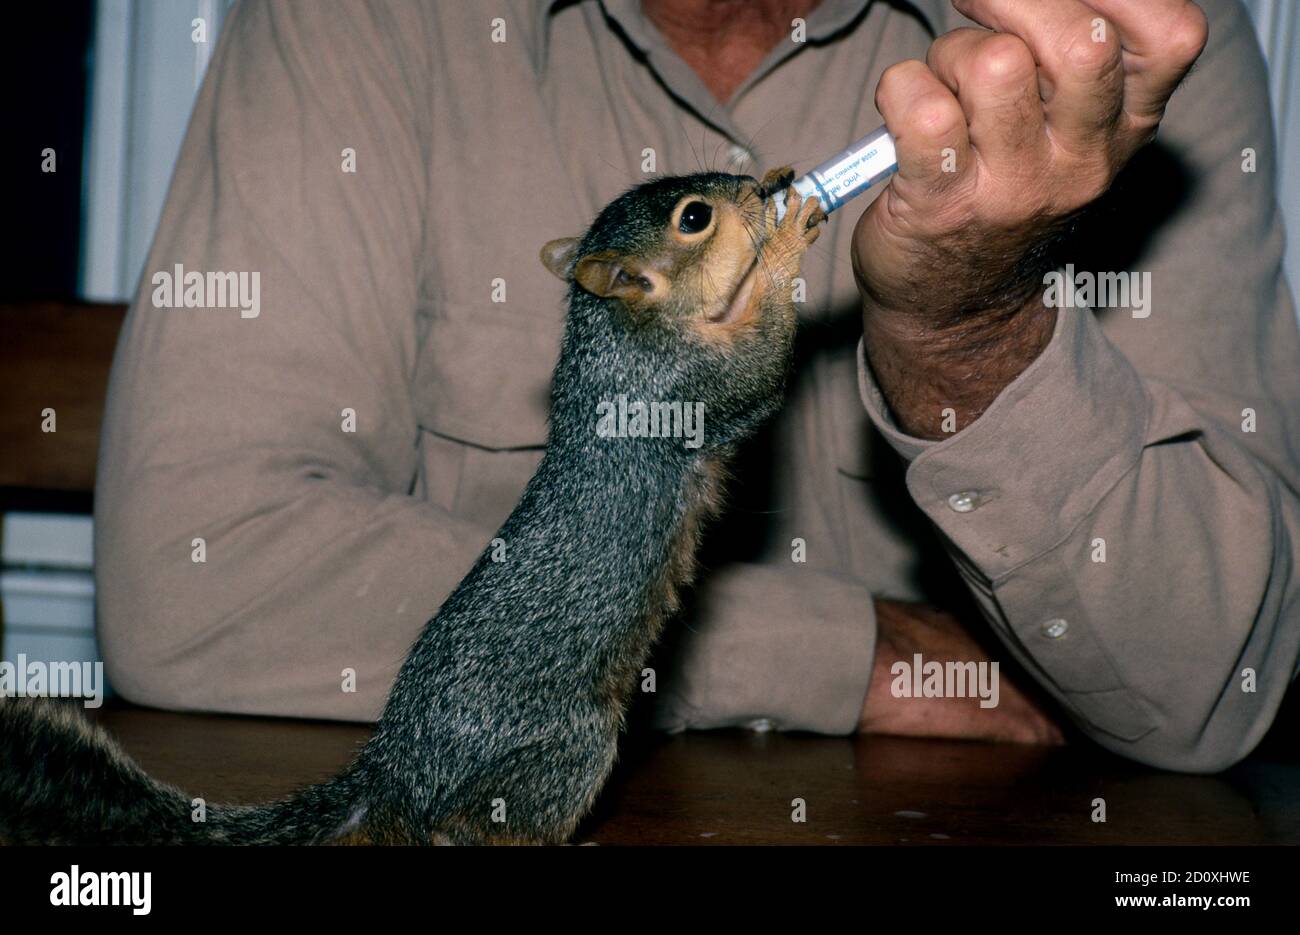 Man feeding baby squirrel milk from a syringe while it stands on hind legs, USA Stock Photo